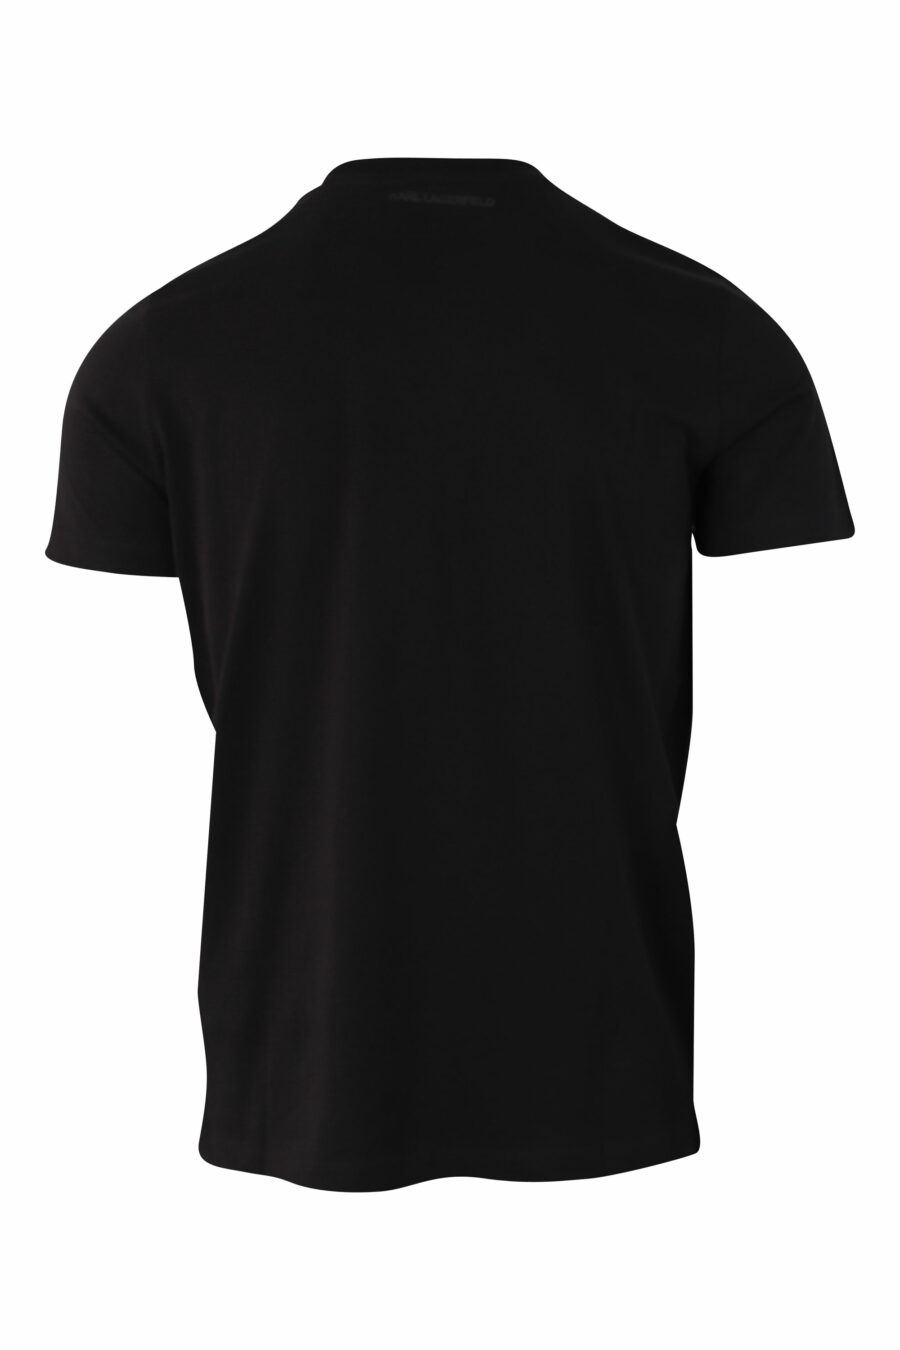 Black T-shirt with holographic logo "rue st guillaume" - IMG 9827 1